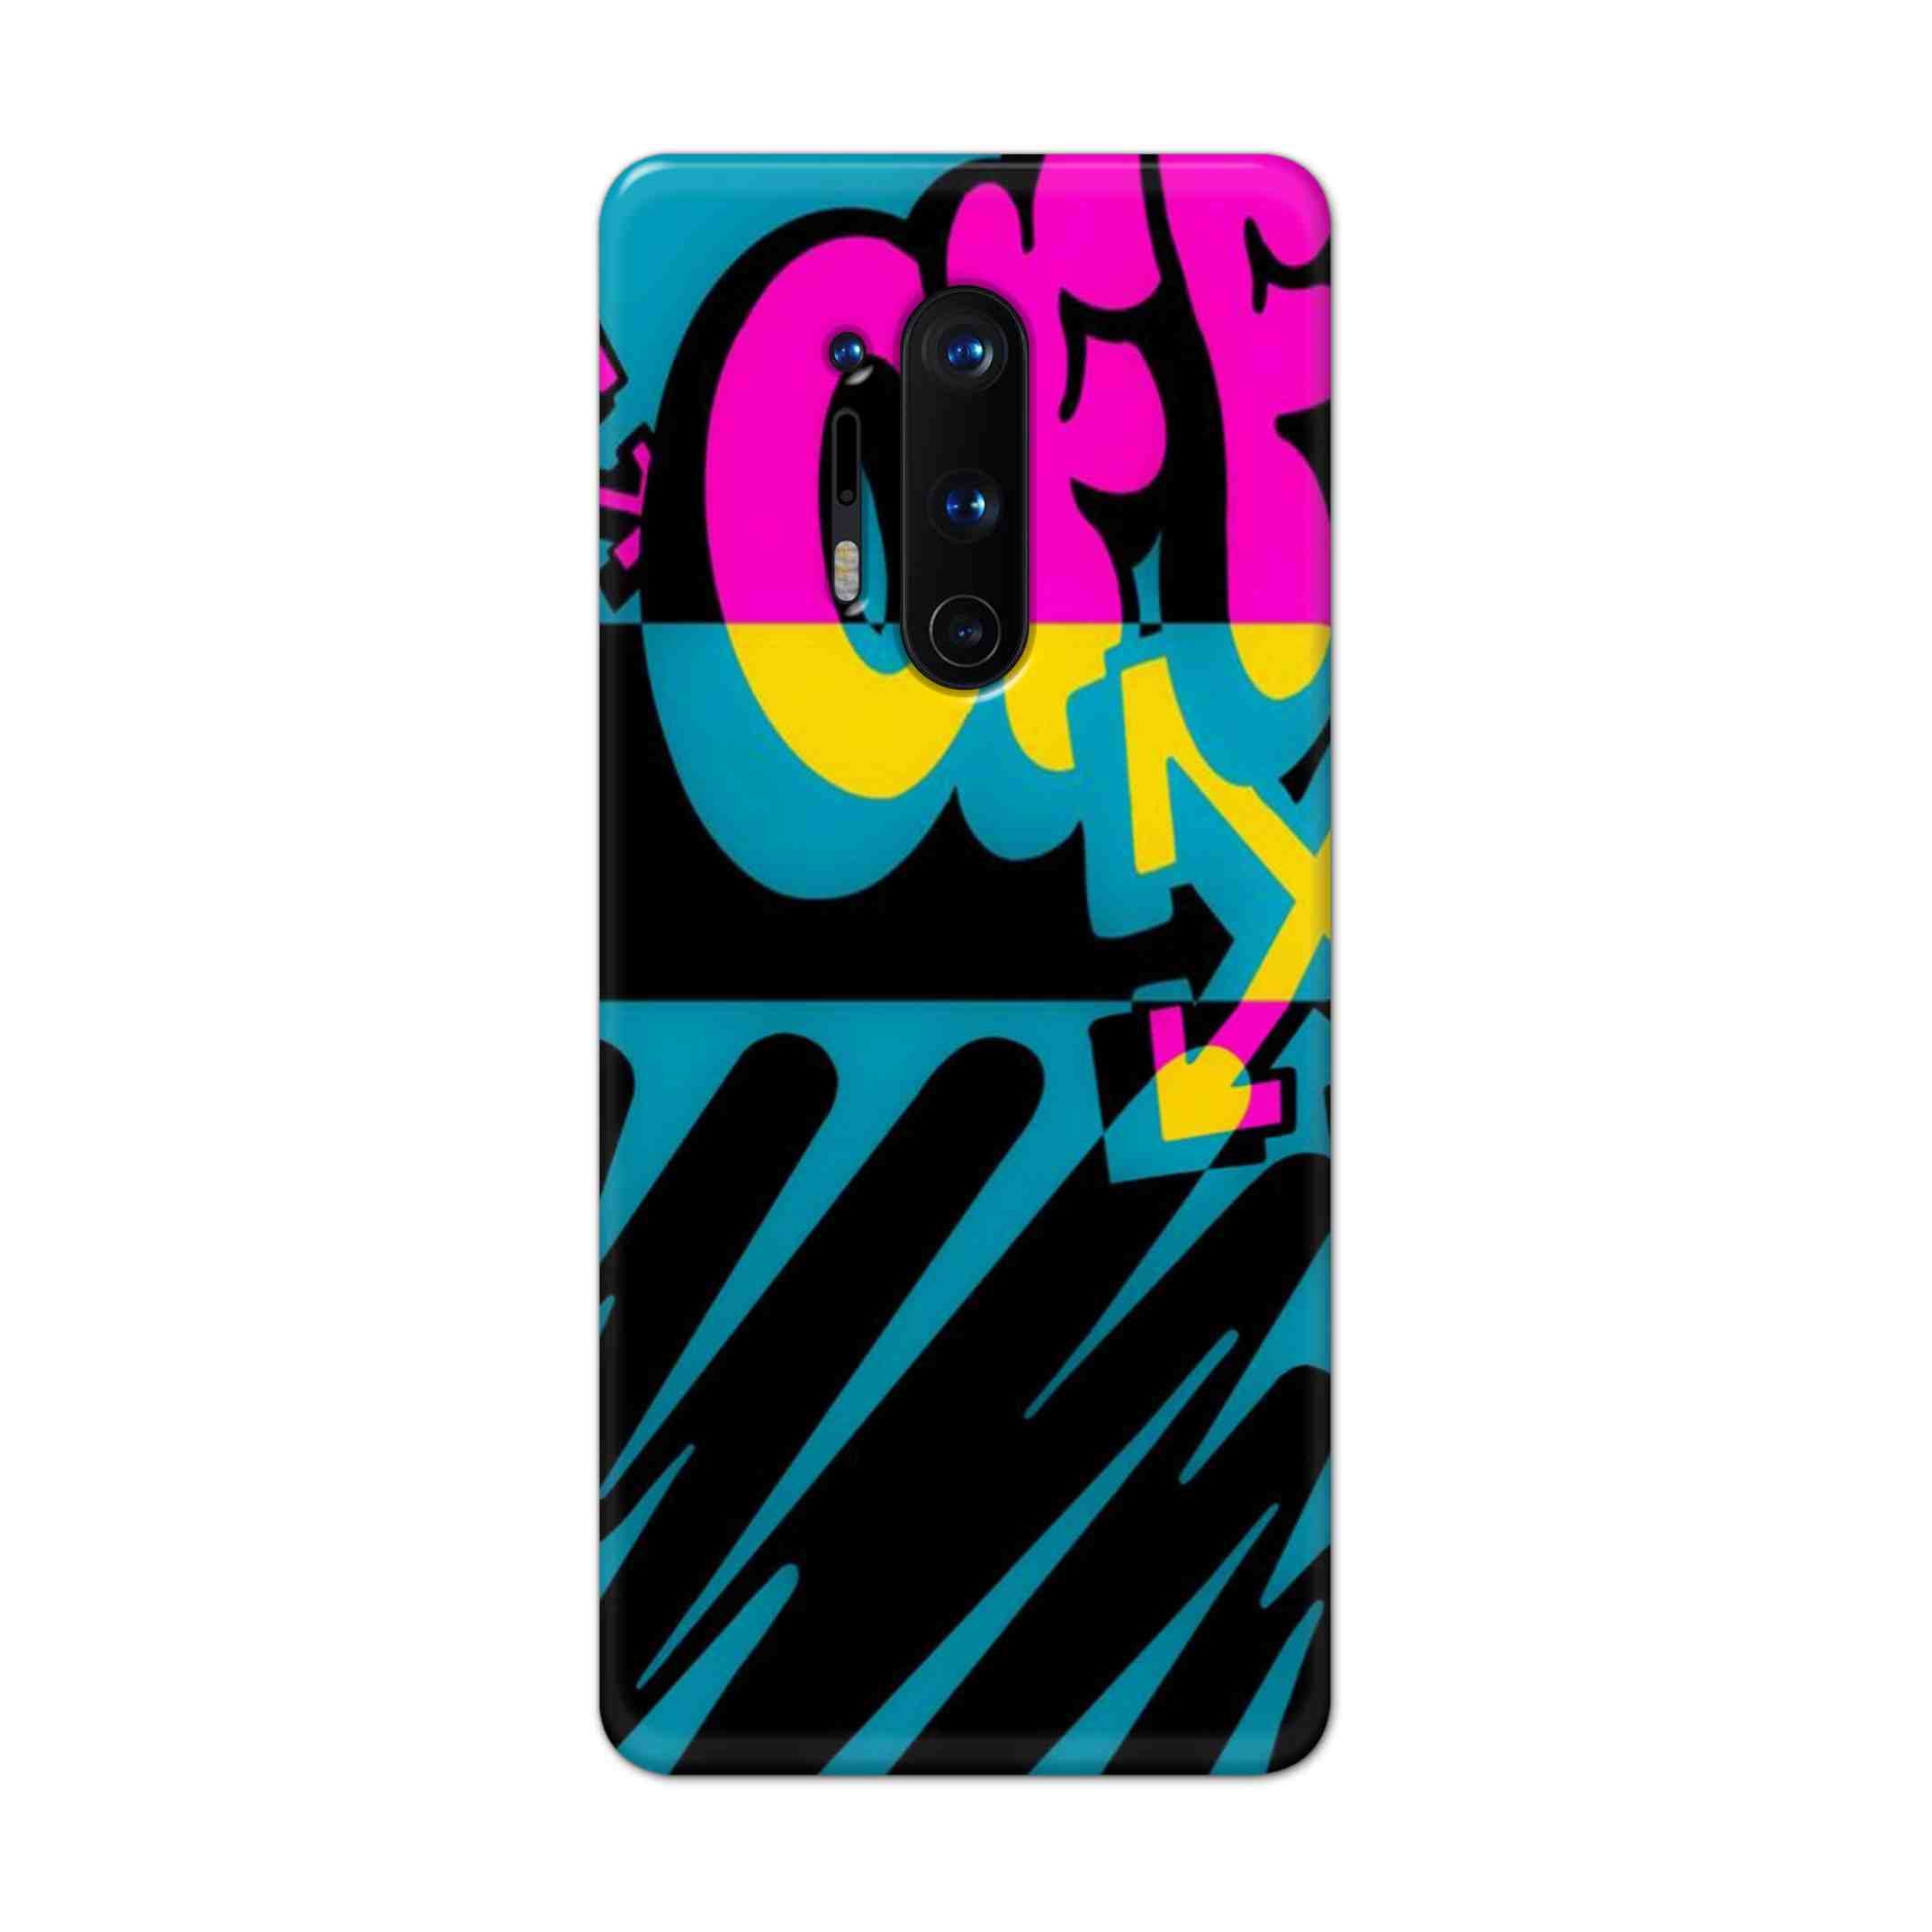 Buy Off Hard Back Mobile Phone Case Cover For OnePlus 8 Pro Online